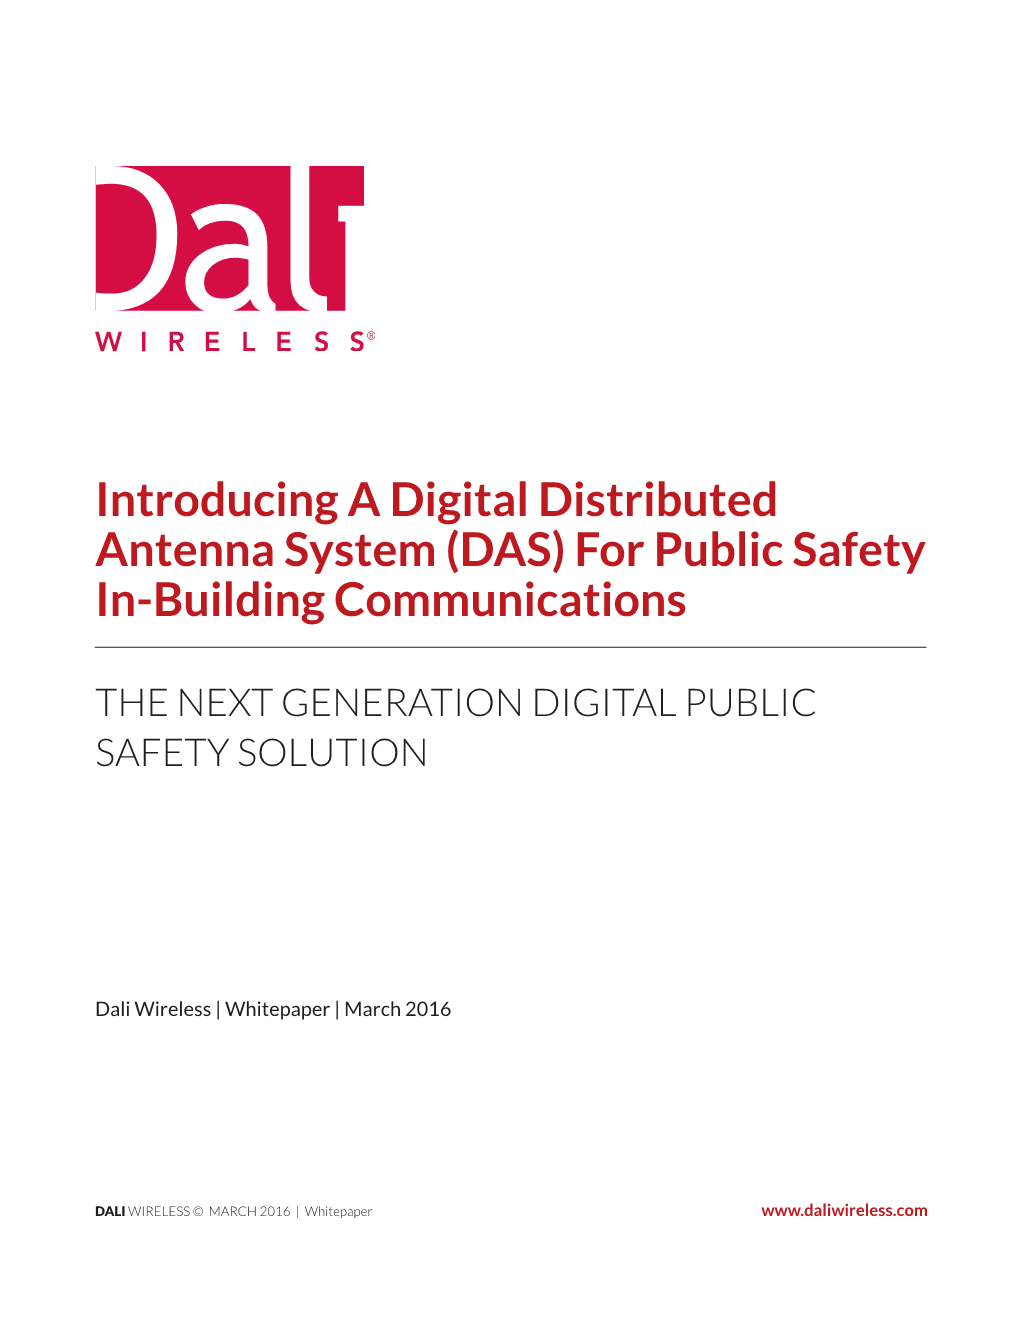 Introducing a Digital Distributed Antenna System (DAS) for Public Safety In-Building Communications